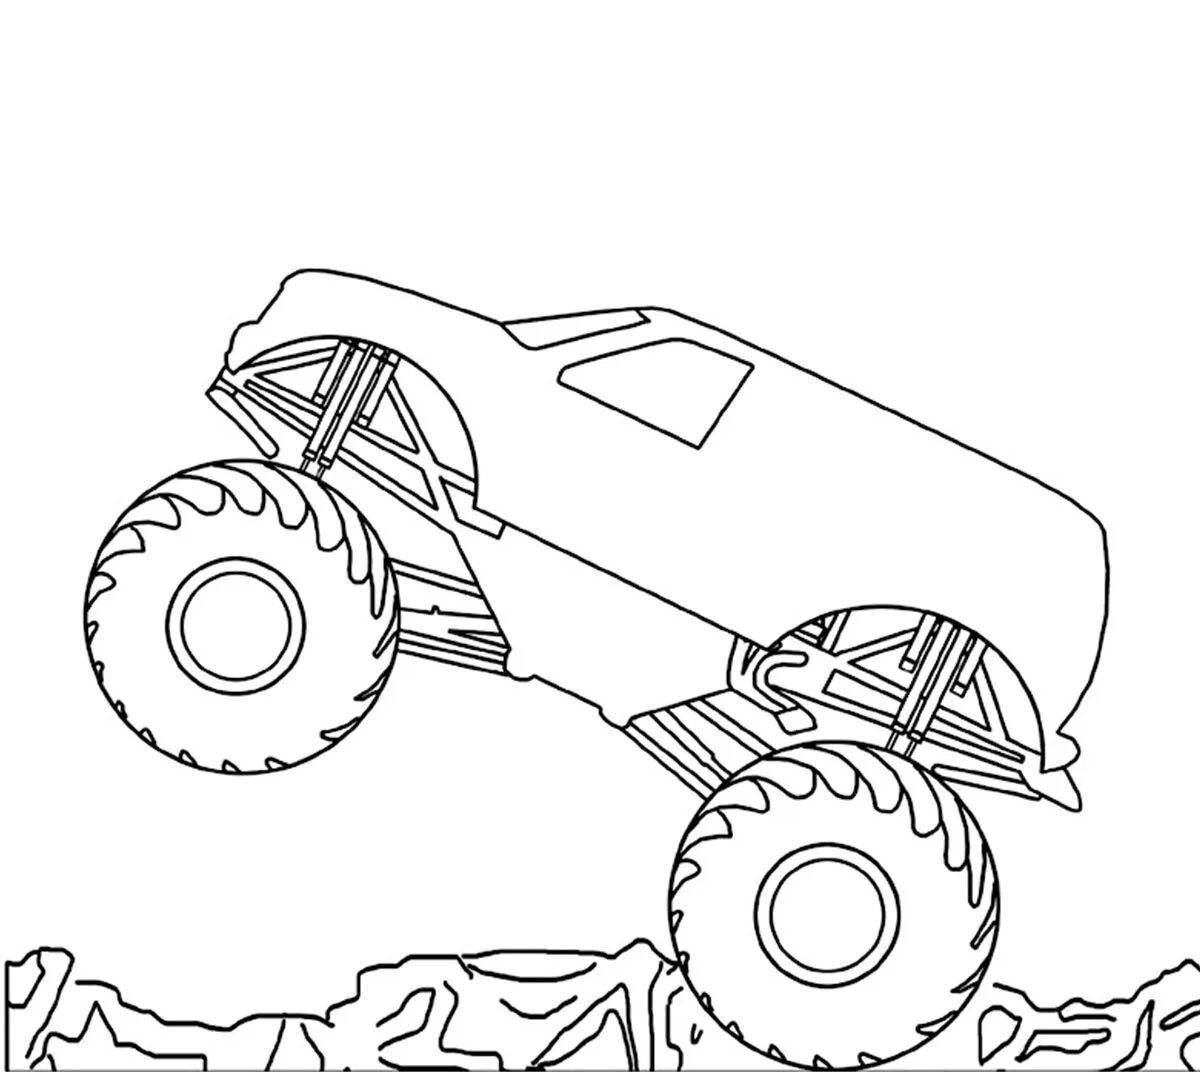 Coloring glitzy monster truck for boys